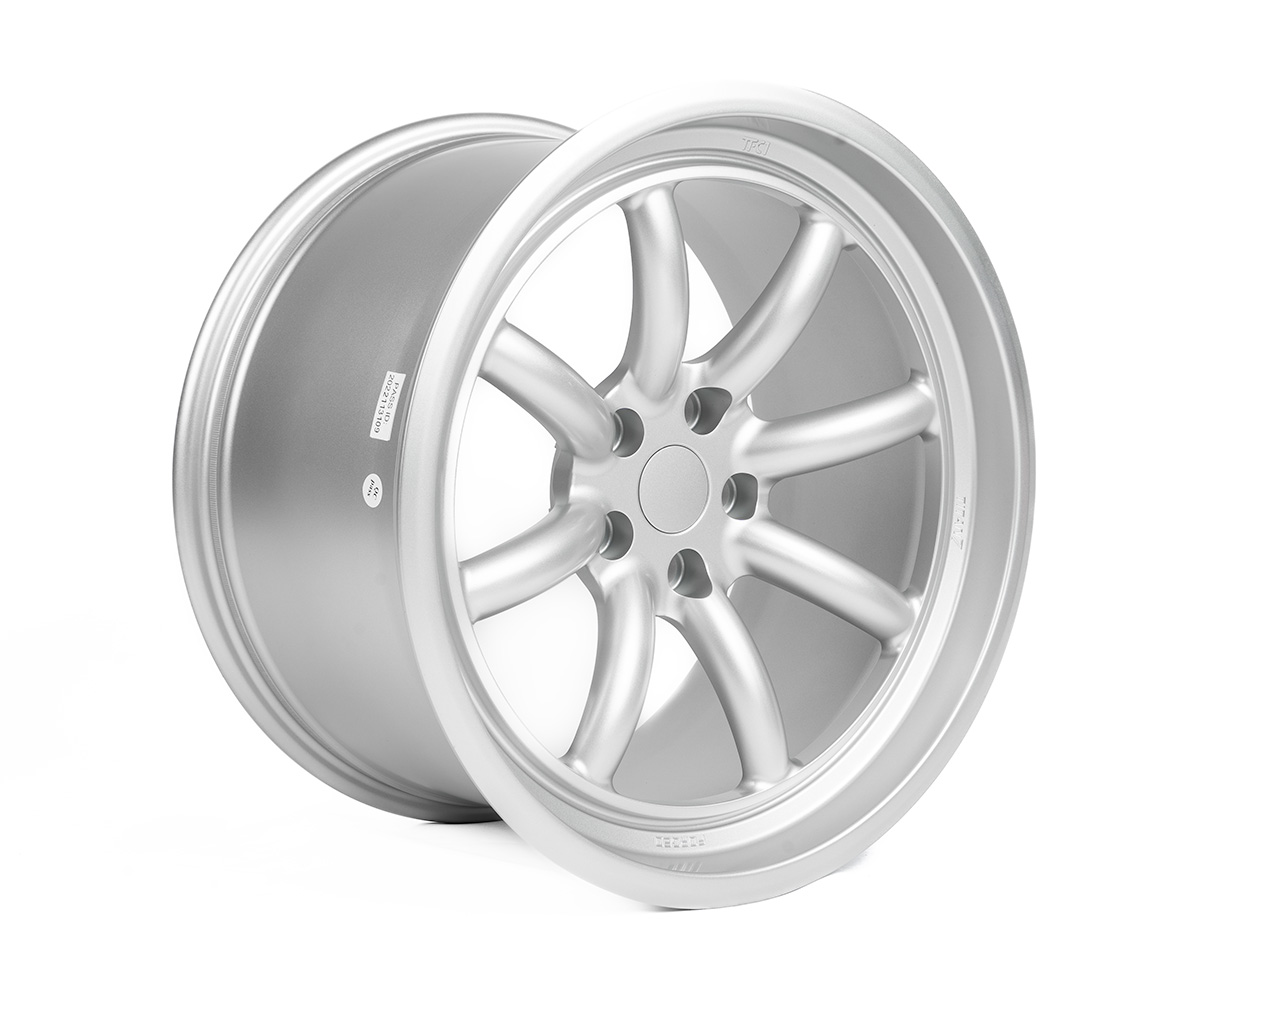 TF-C1 Forged Wheels - Set of 4 (Silver 19x9.5 +12 / 19x10.5 +21 